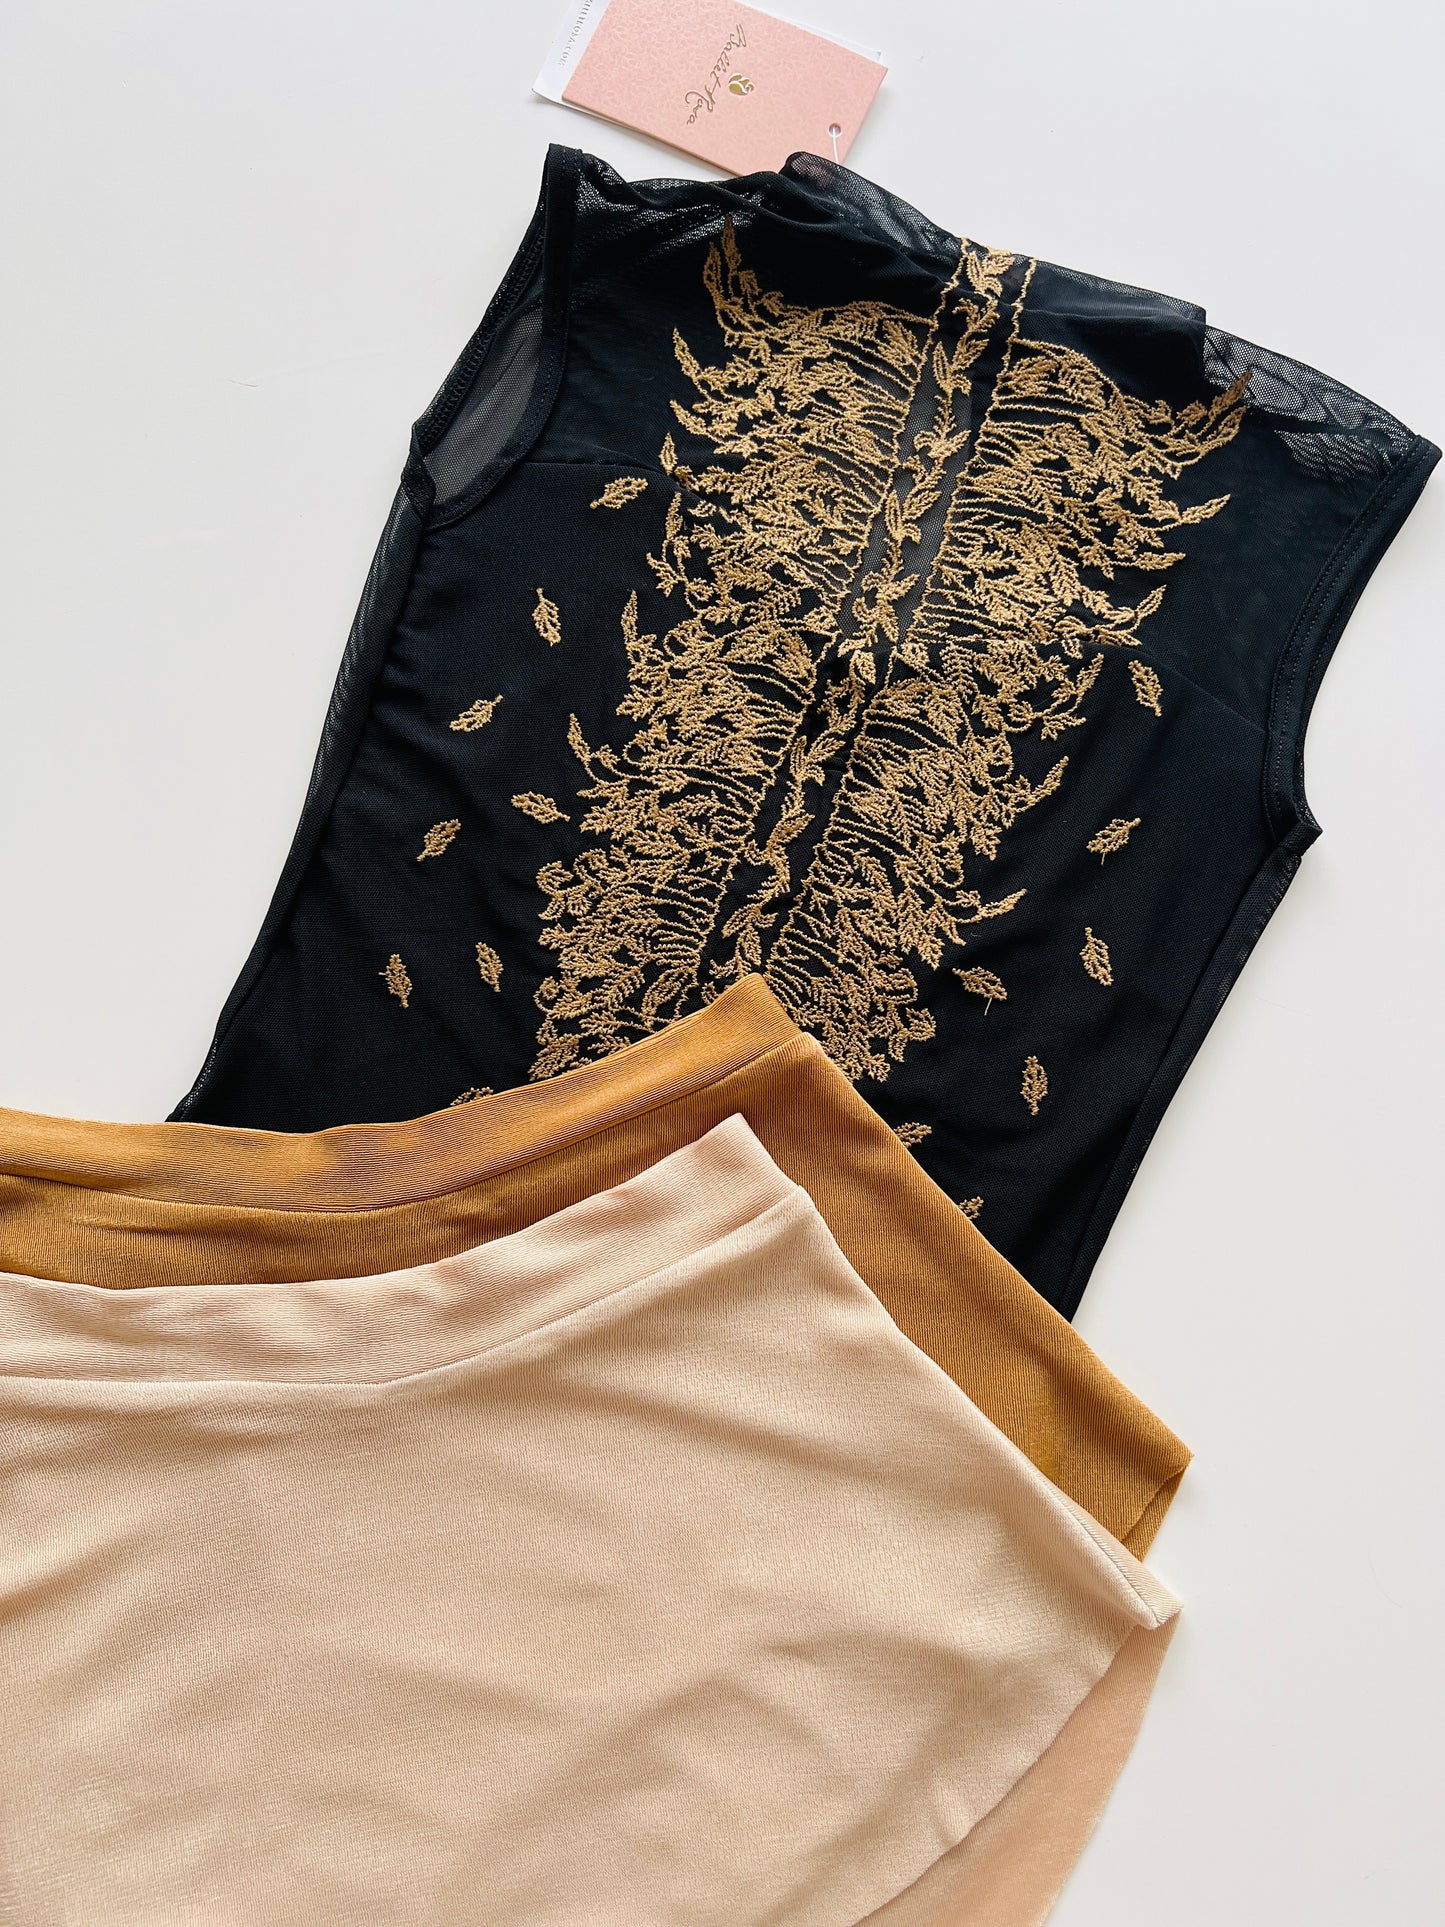 Harper leotard in gold with Bullet Pointe skirts Drift and Gold from the Collective Dancewear 